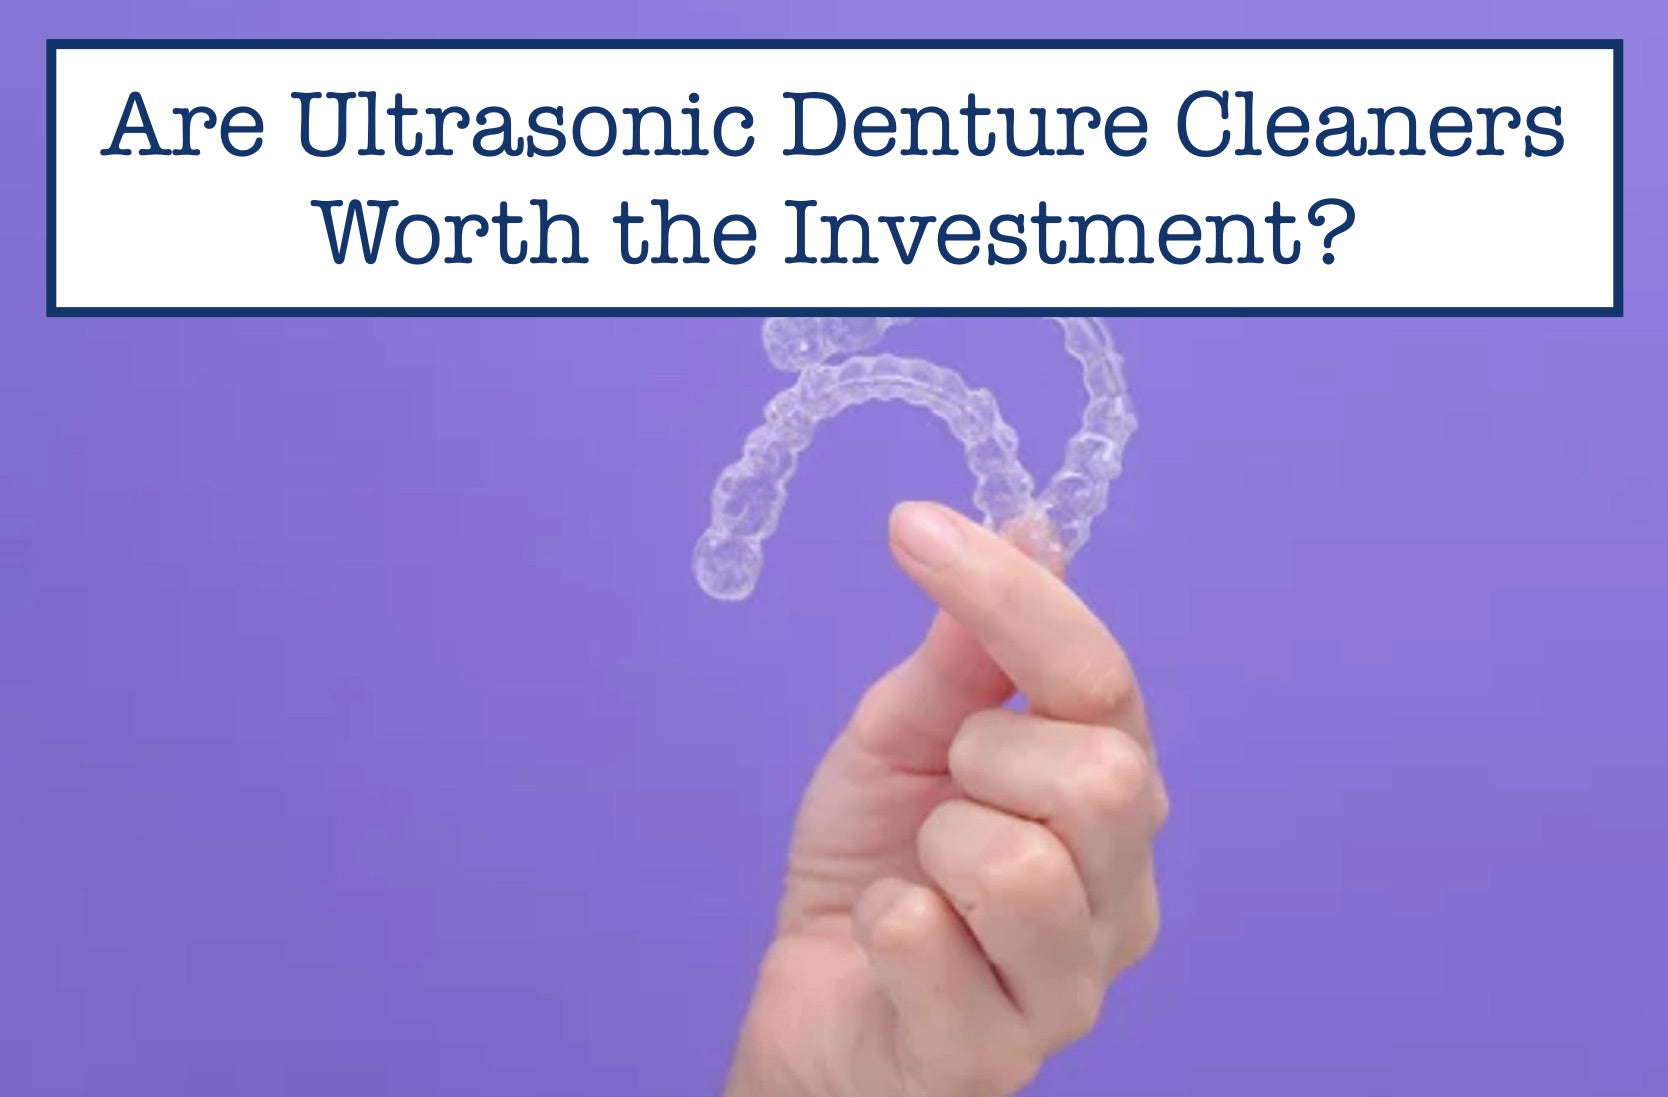 Are Ultrasonic Denture Cleaners Worth the Investment?